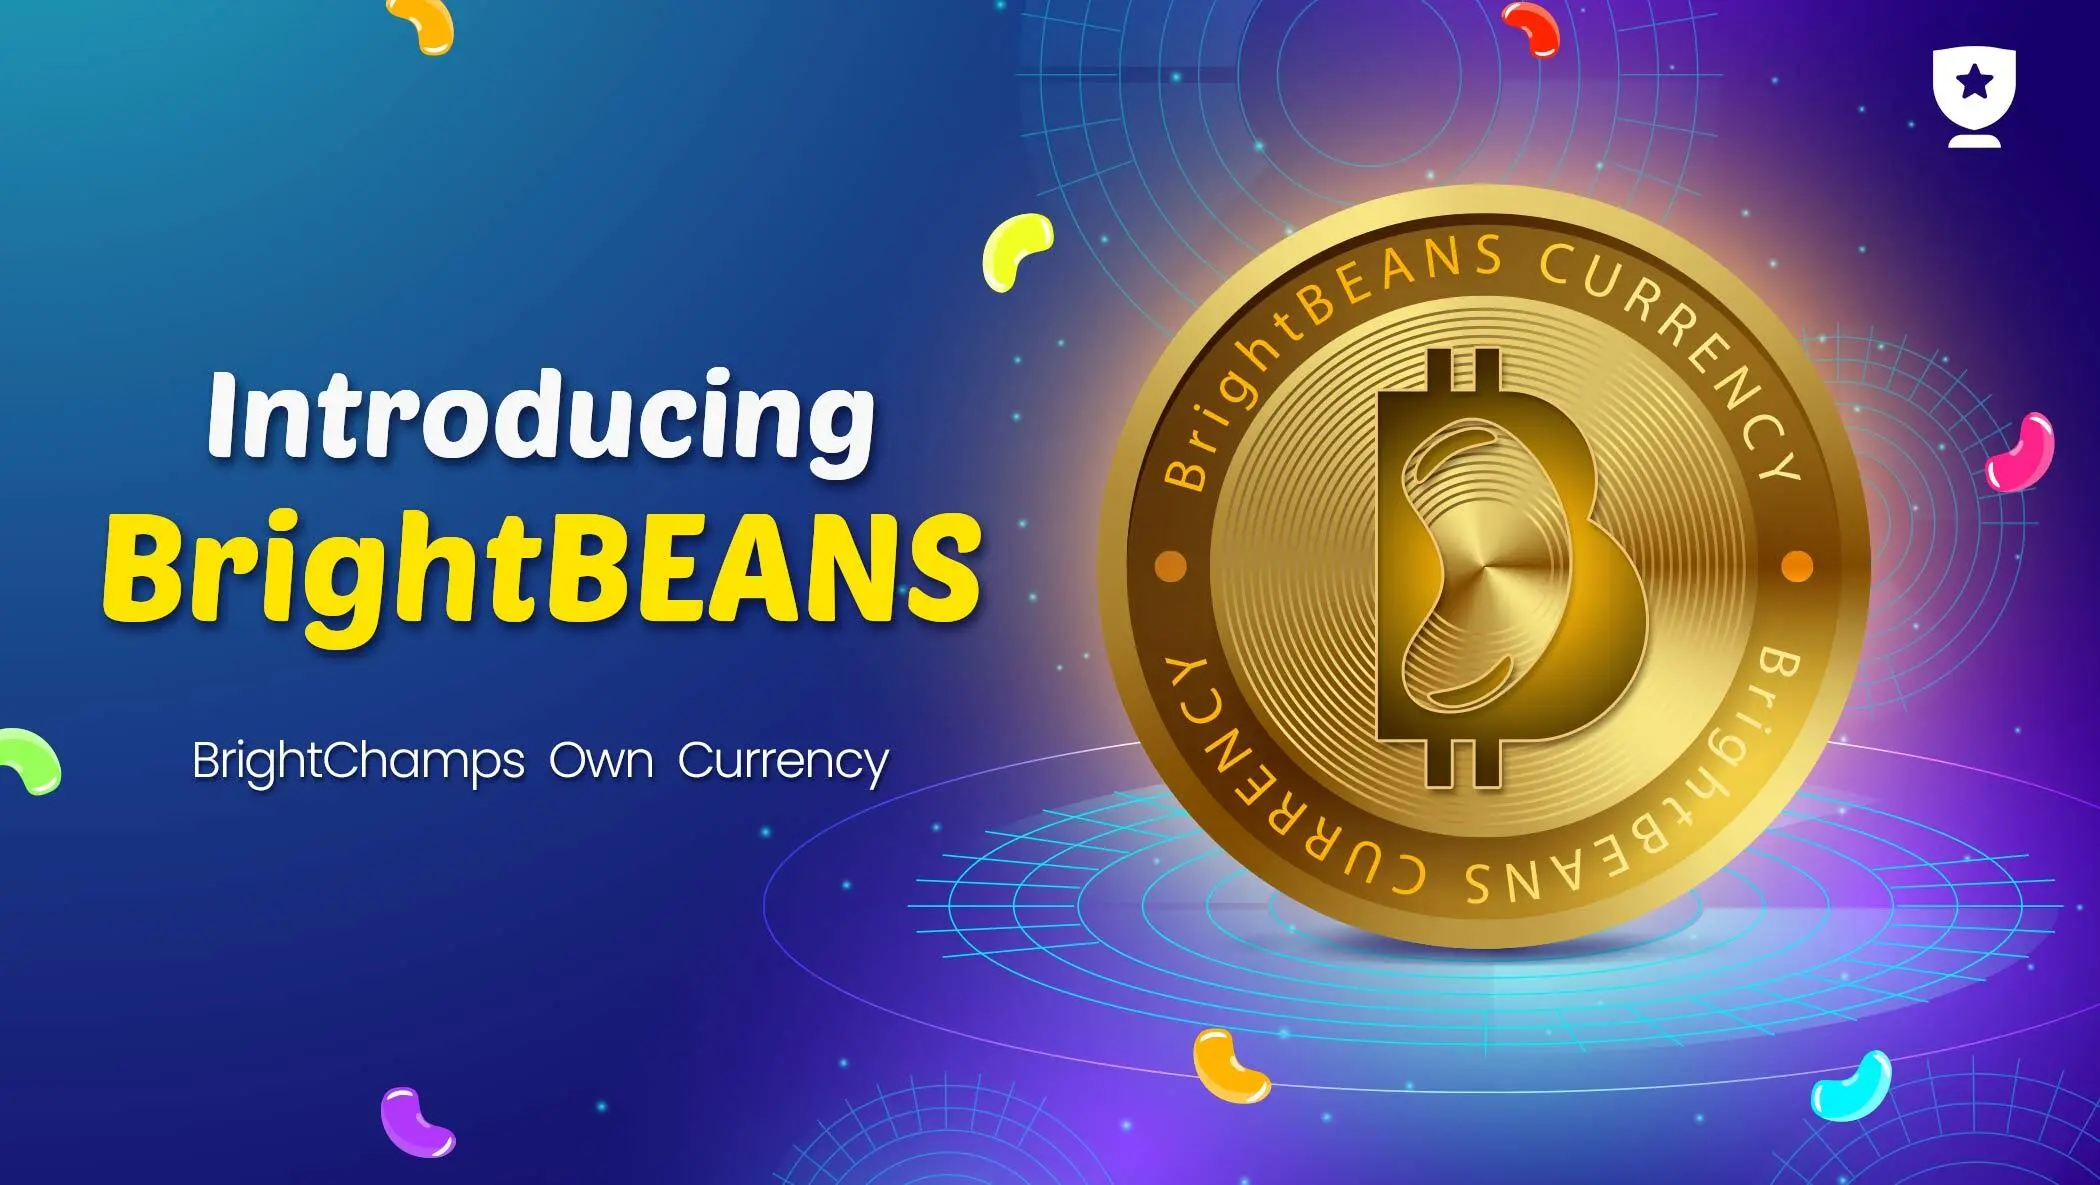 Introducing BrightBEANS Currency